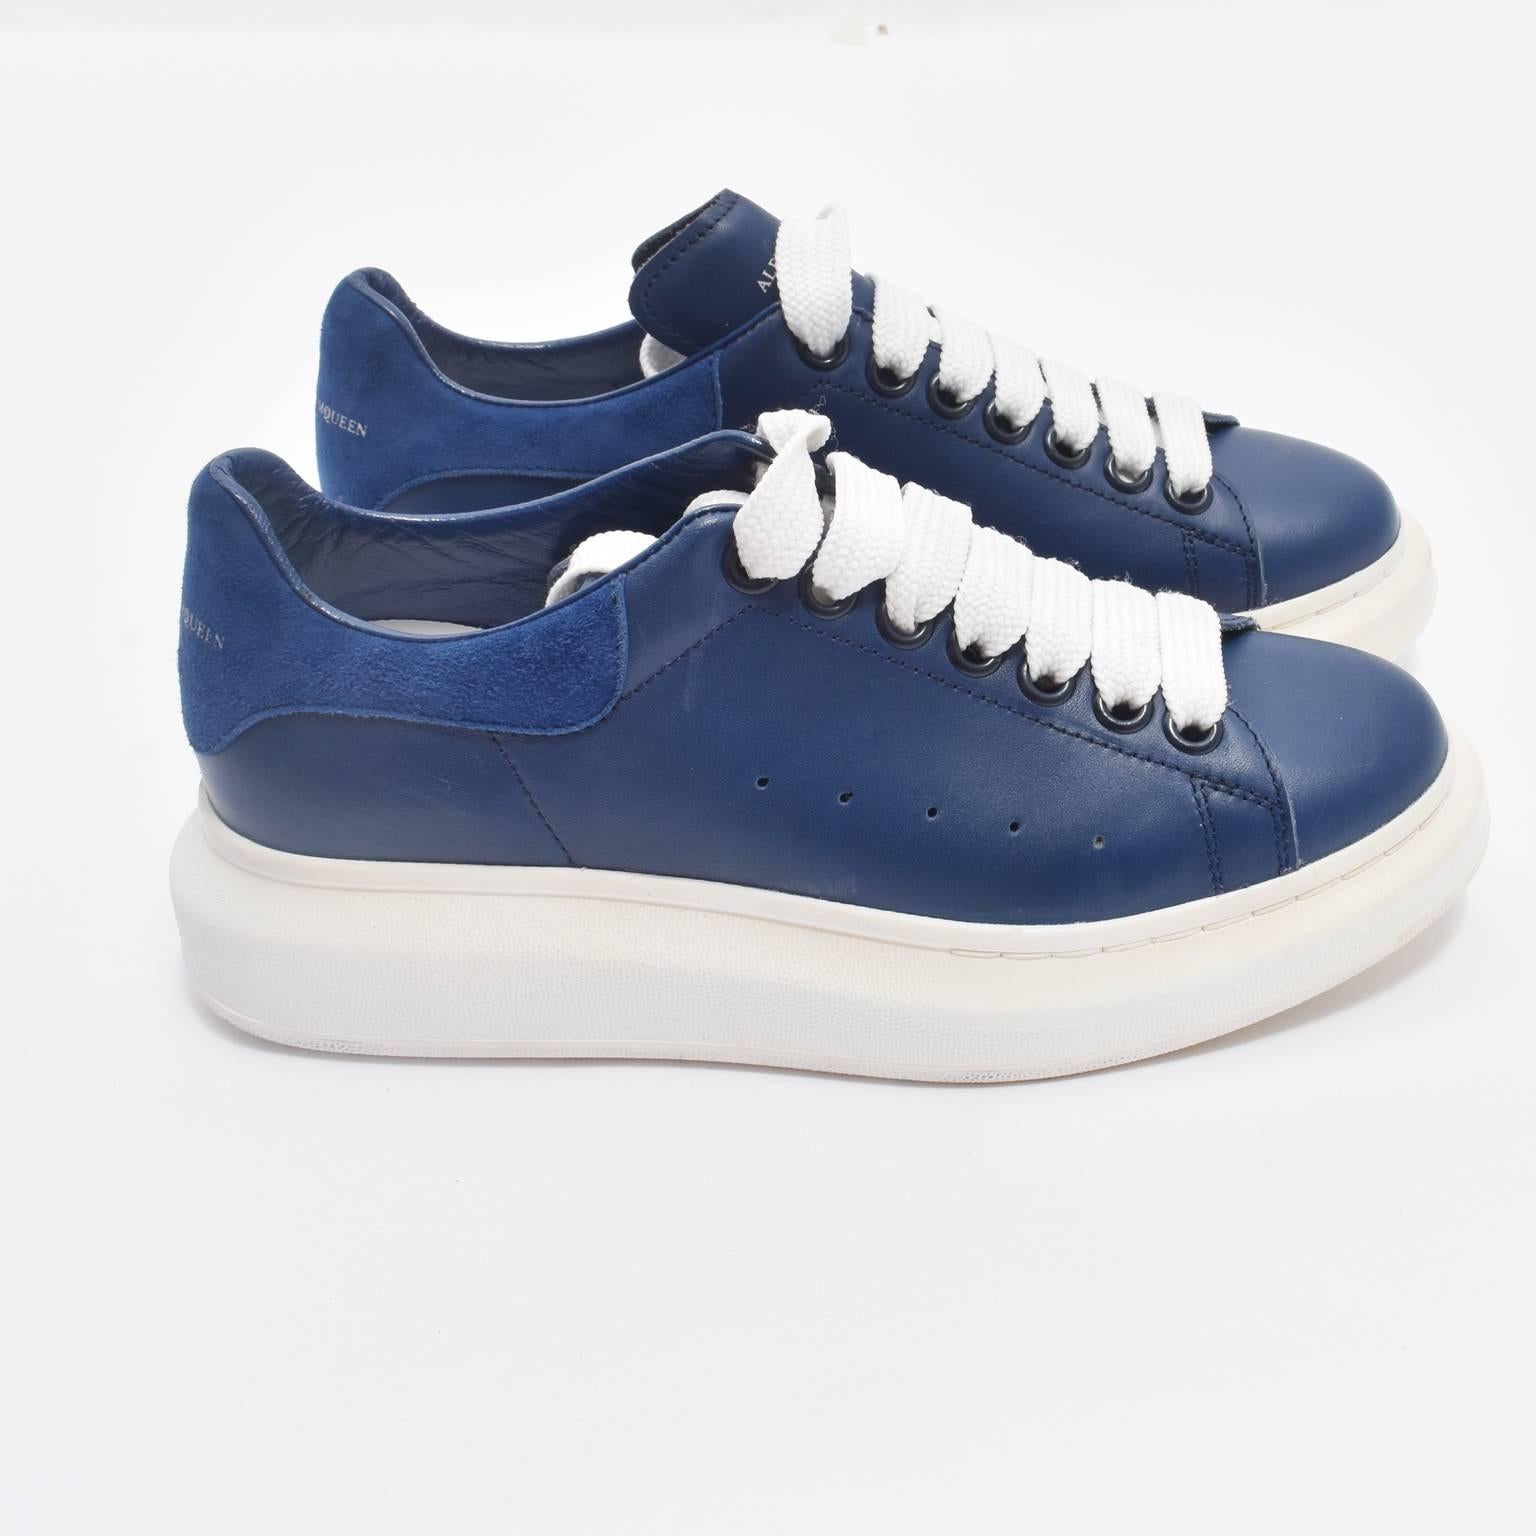 A pair of brand new navy blue sneakers from Alexander McQueen. The sneakers are made from soft leather with a contrasting chunky white rubber sole with a height of 1.5 inches. The sneakers have a lace-up fastening and come with their original dust